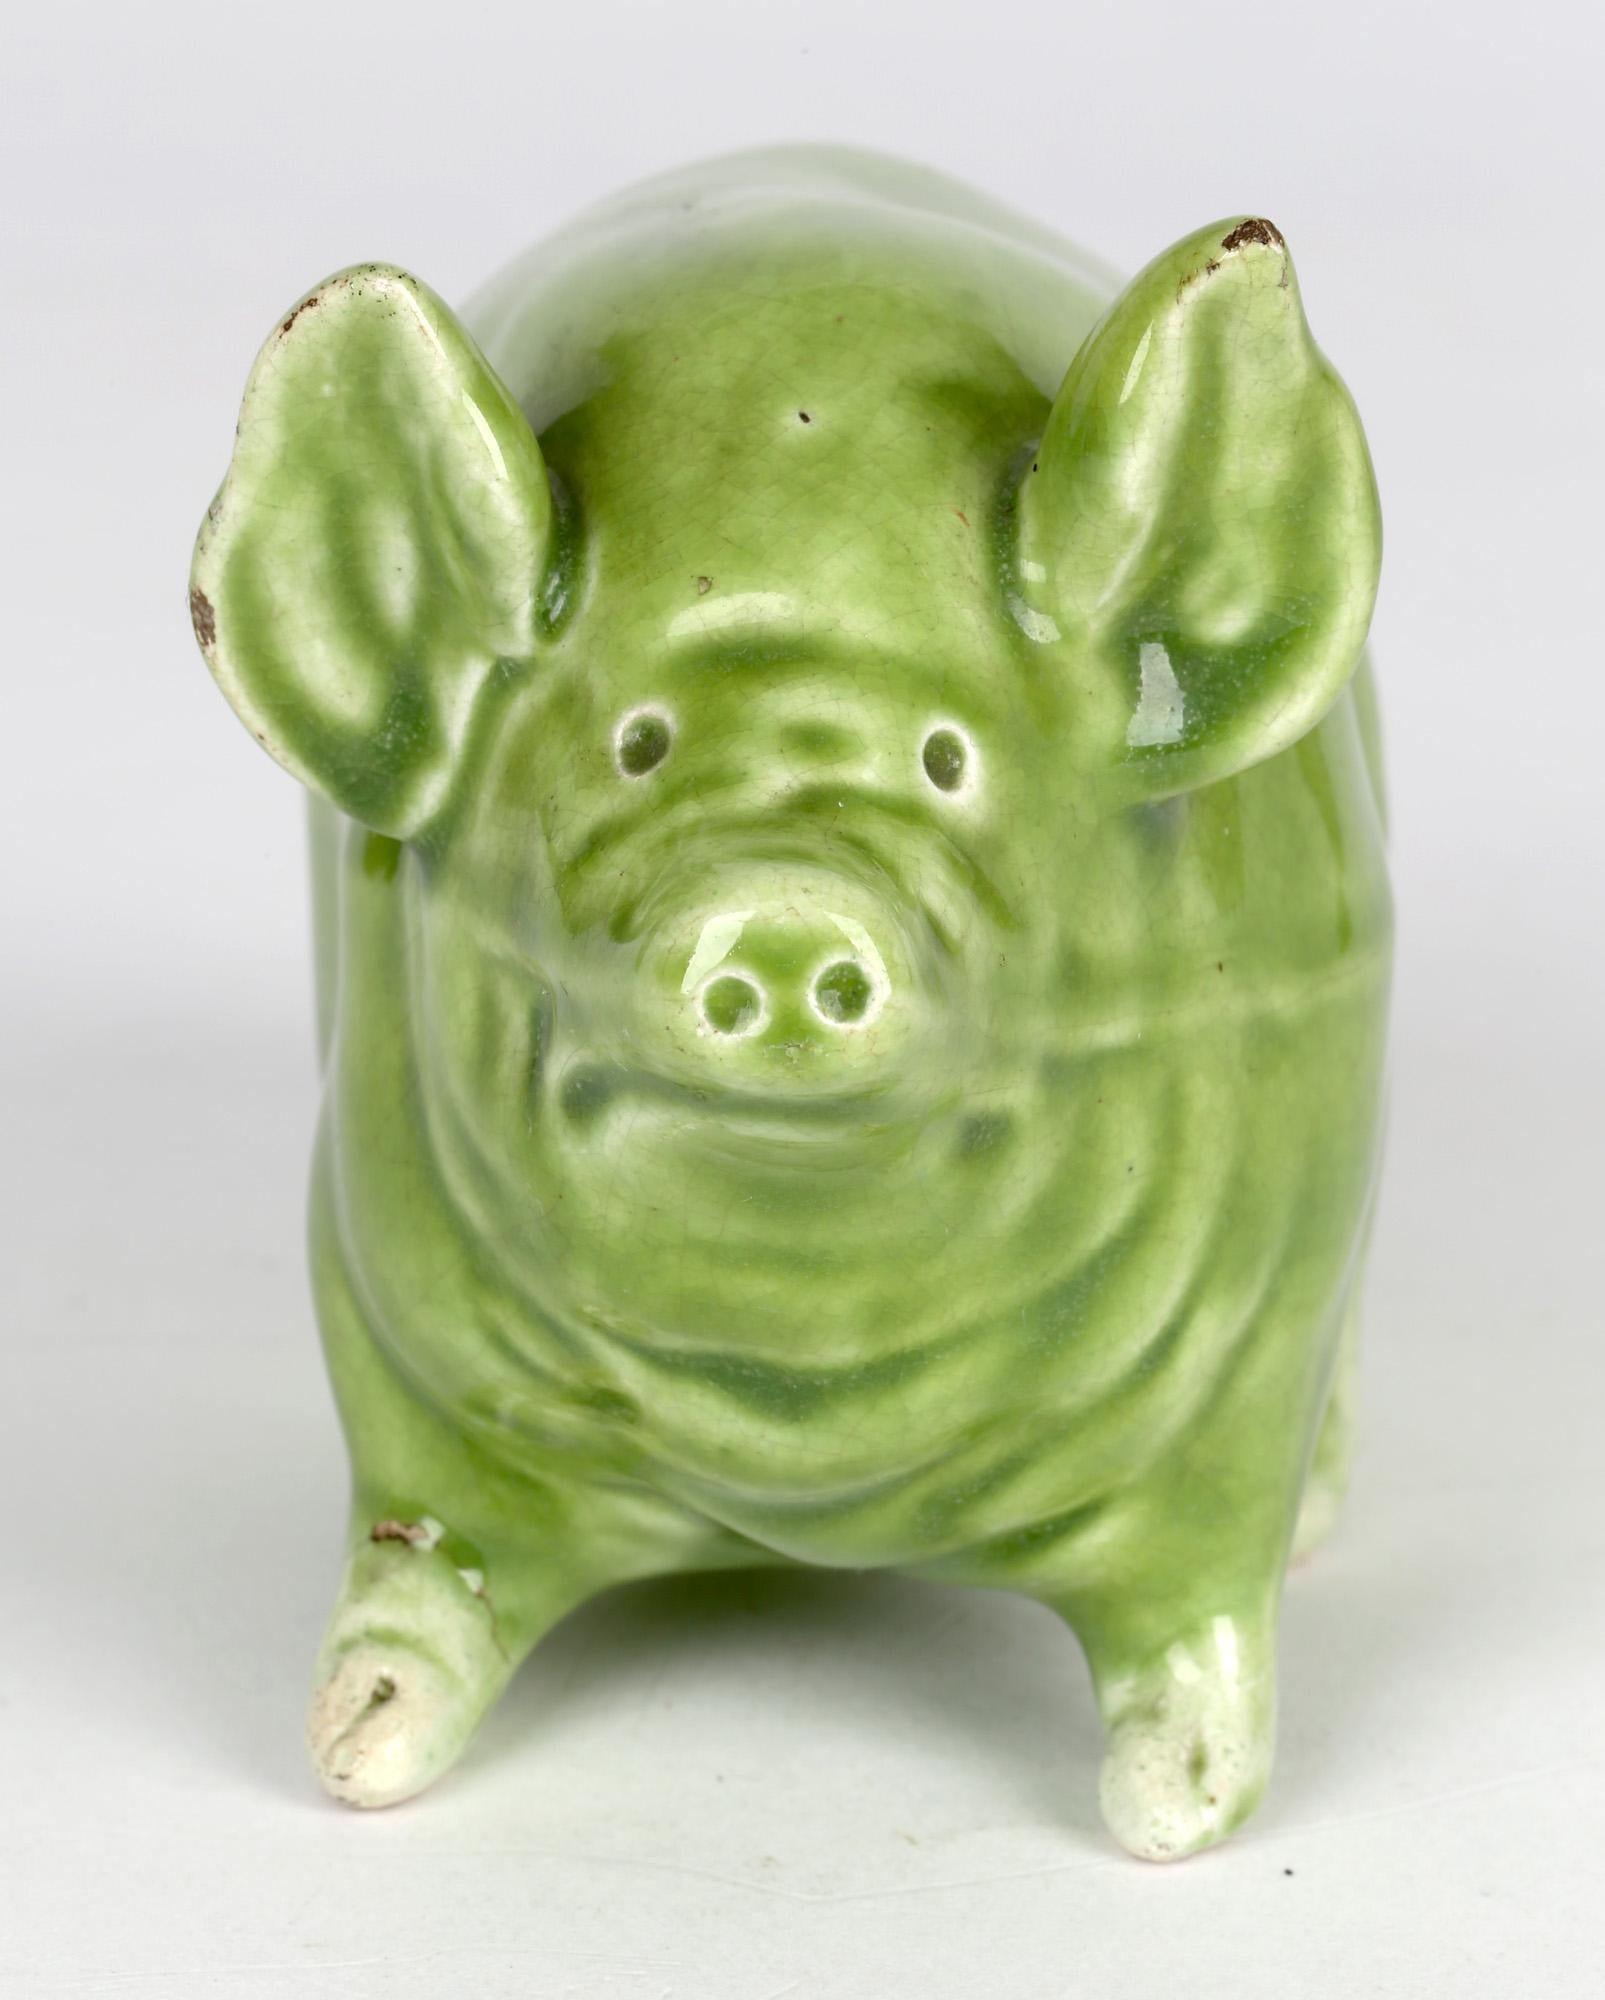 A delightful Scottish Wemyss Ware pottery pig decorated in green glazes made by Robert Heron & Son and dating from around 1900. The well potted earthenware figure stands raised on four short small legs with pig shaped body, raised ears, snout and